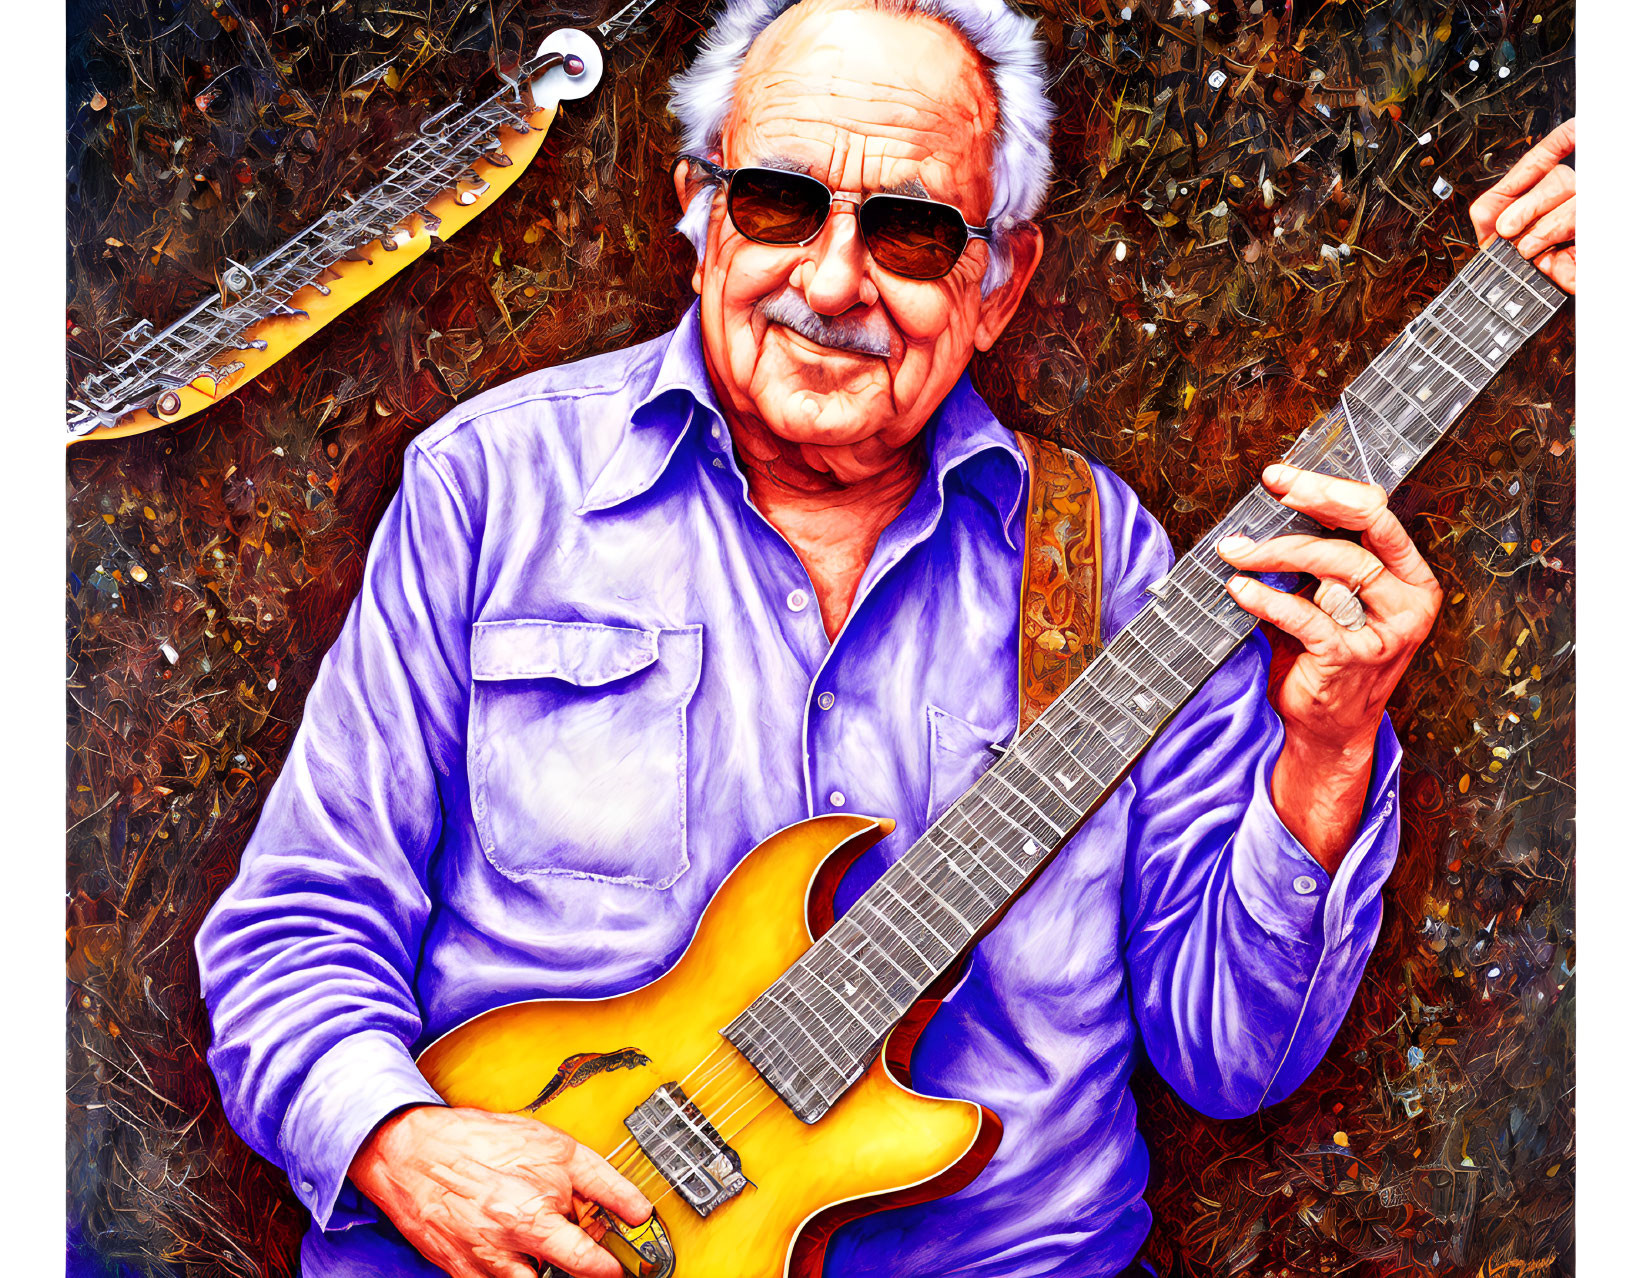 Smiling elderly man with sunglasses holding guitar among autumn leaves and saxophone